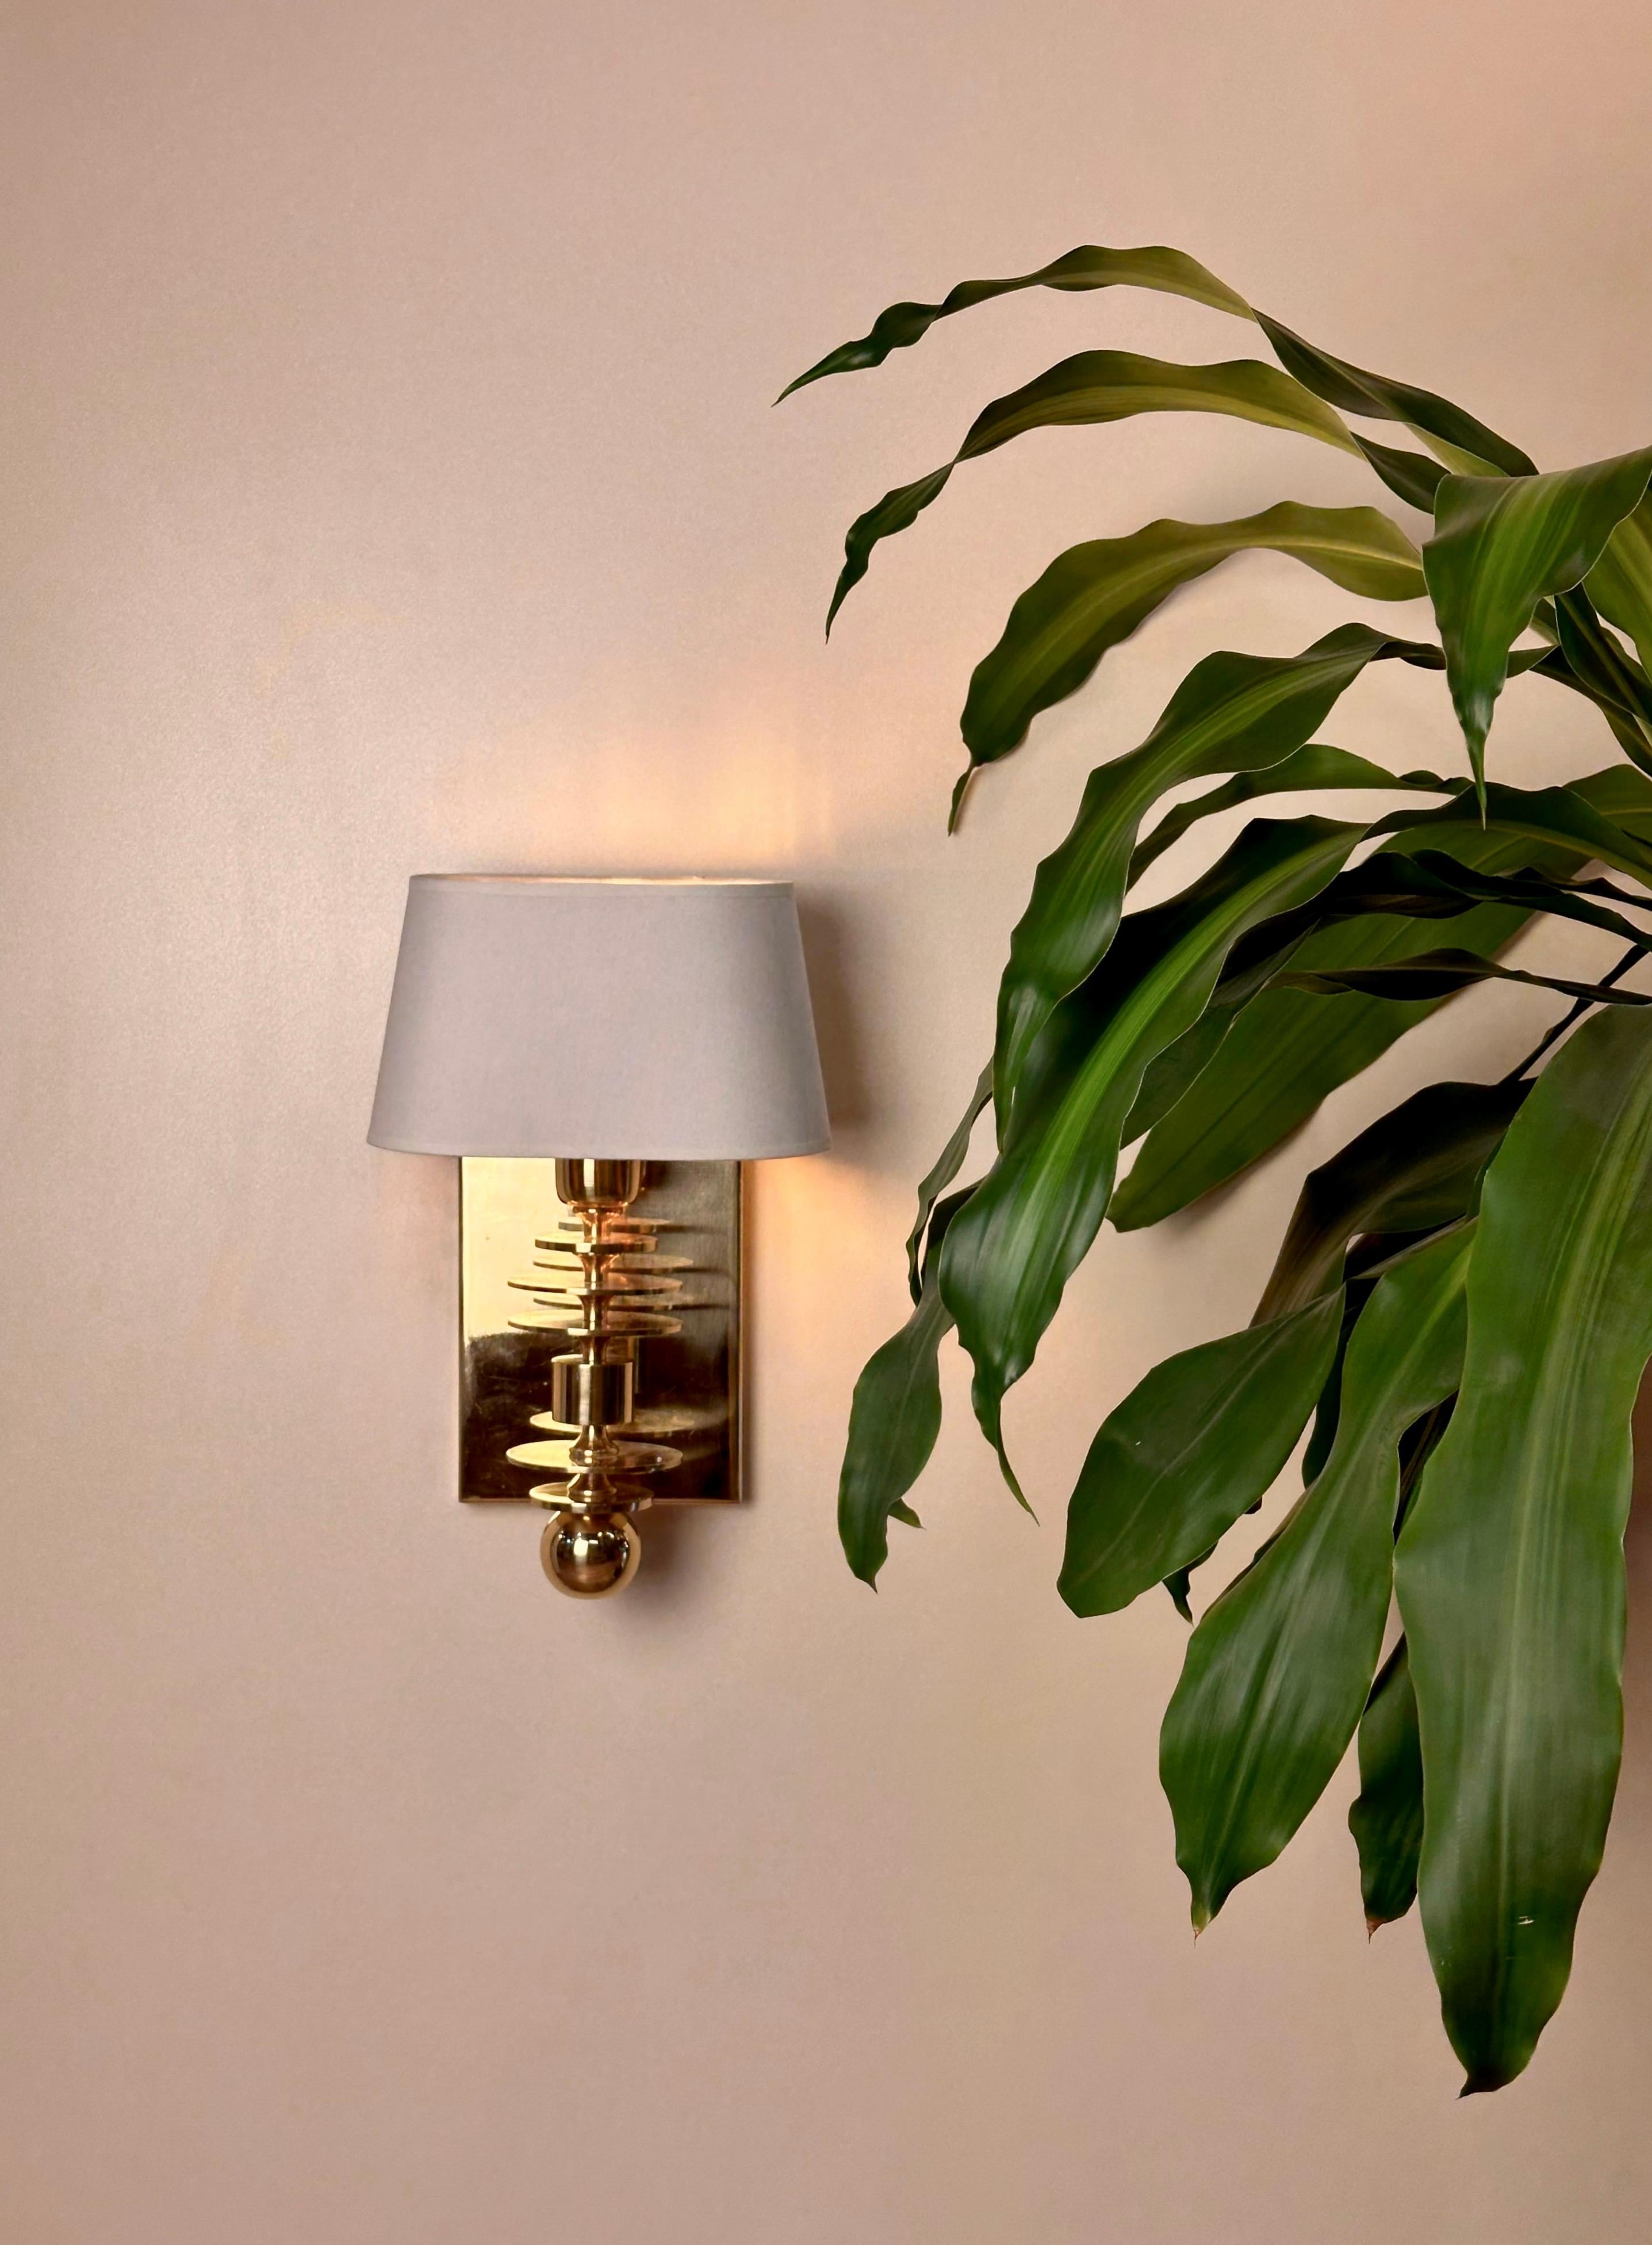 Contemporary Marsala Shade Brass Wall Sconce Mid-Century Modern Lighting For Sale